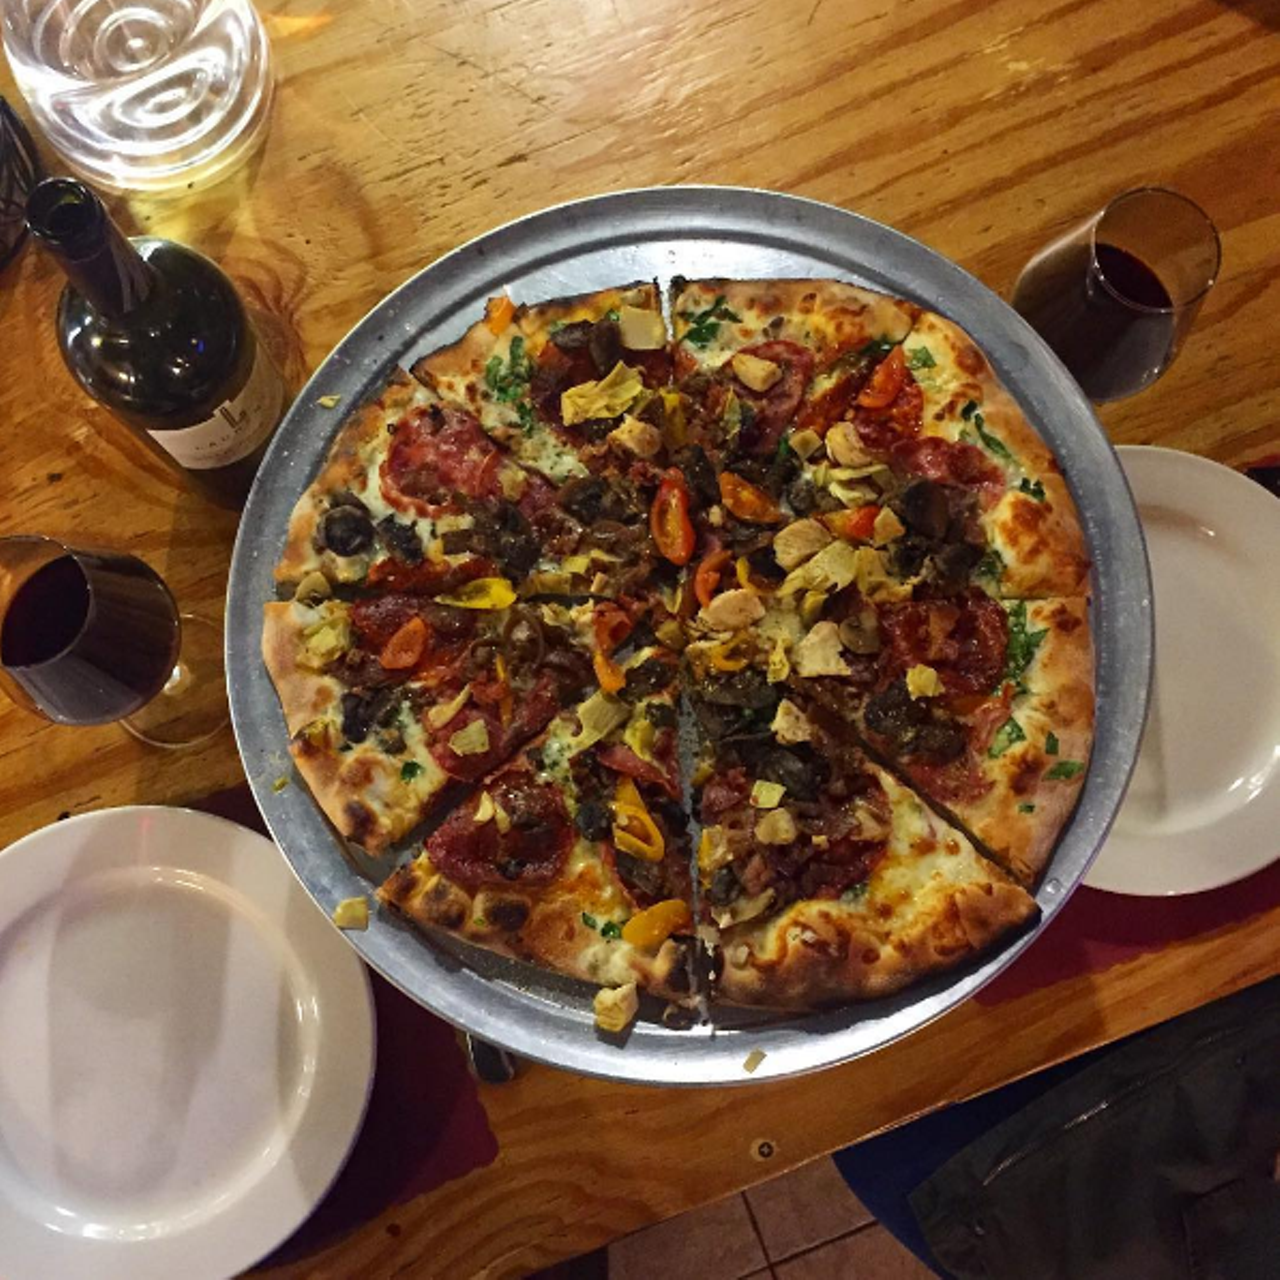 Double Diablo pizza from Wine Barn
959 W. Fairbanks Ave., 407-599-9463
This spicy and tangy pizza, made to order in a wood-fire oven, has flavorful ingredients like calabrese hot salame, sopressata, baklouti green chili, San Marzano tomato and fior di latte. 
Photo via yelpflorida/Instagram